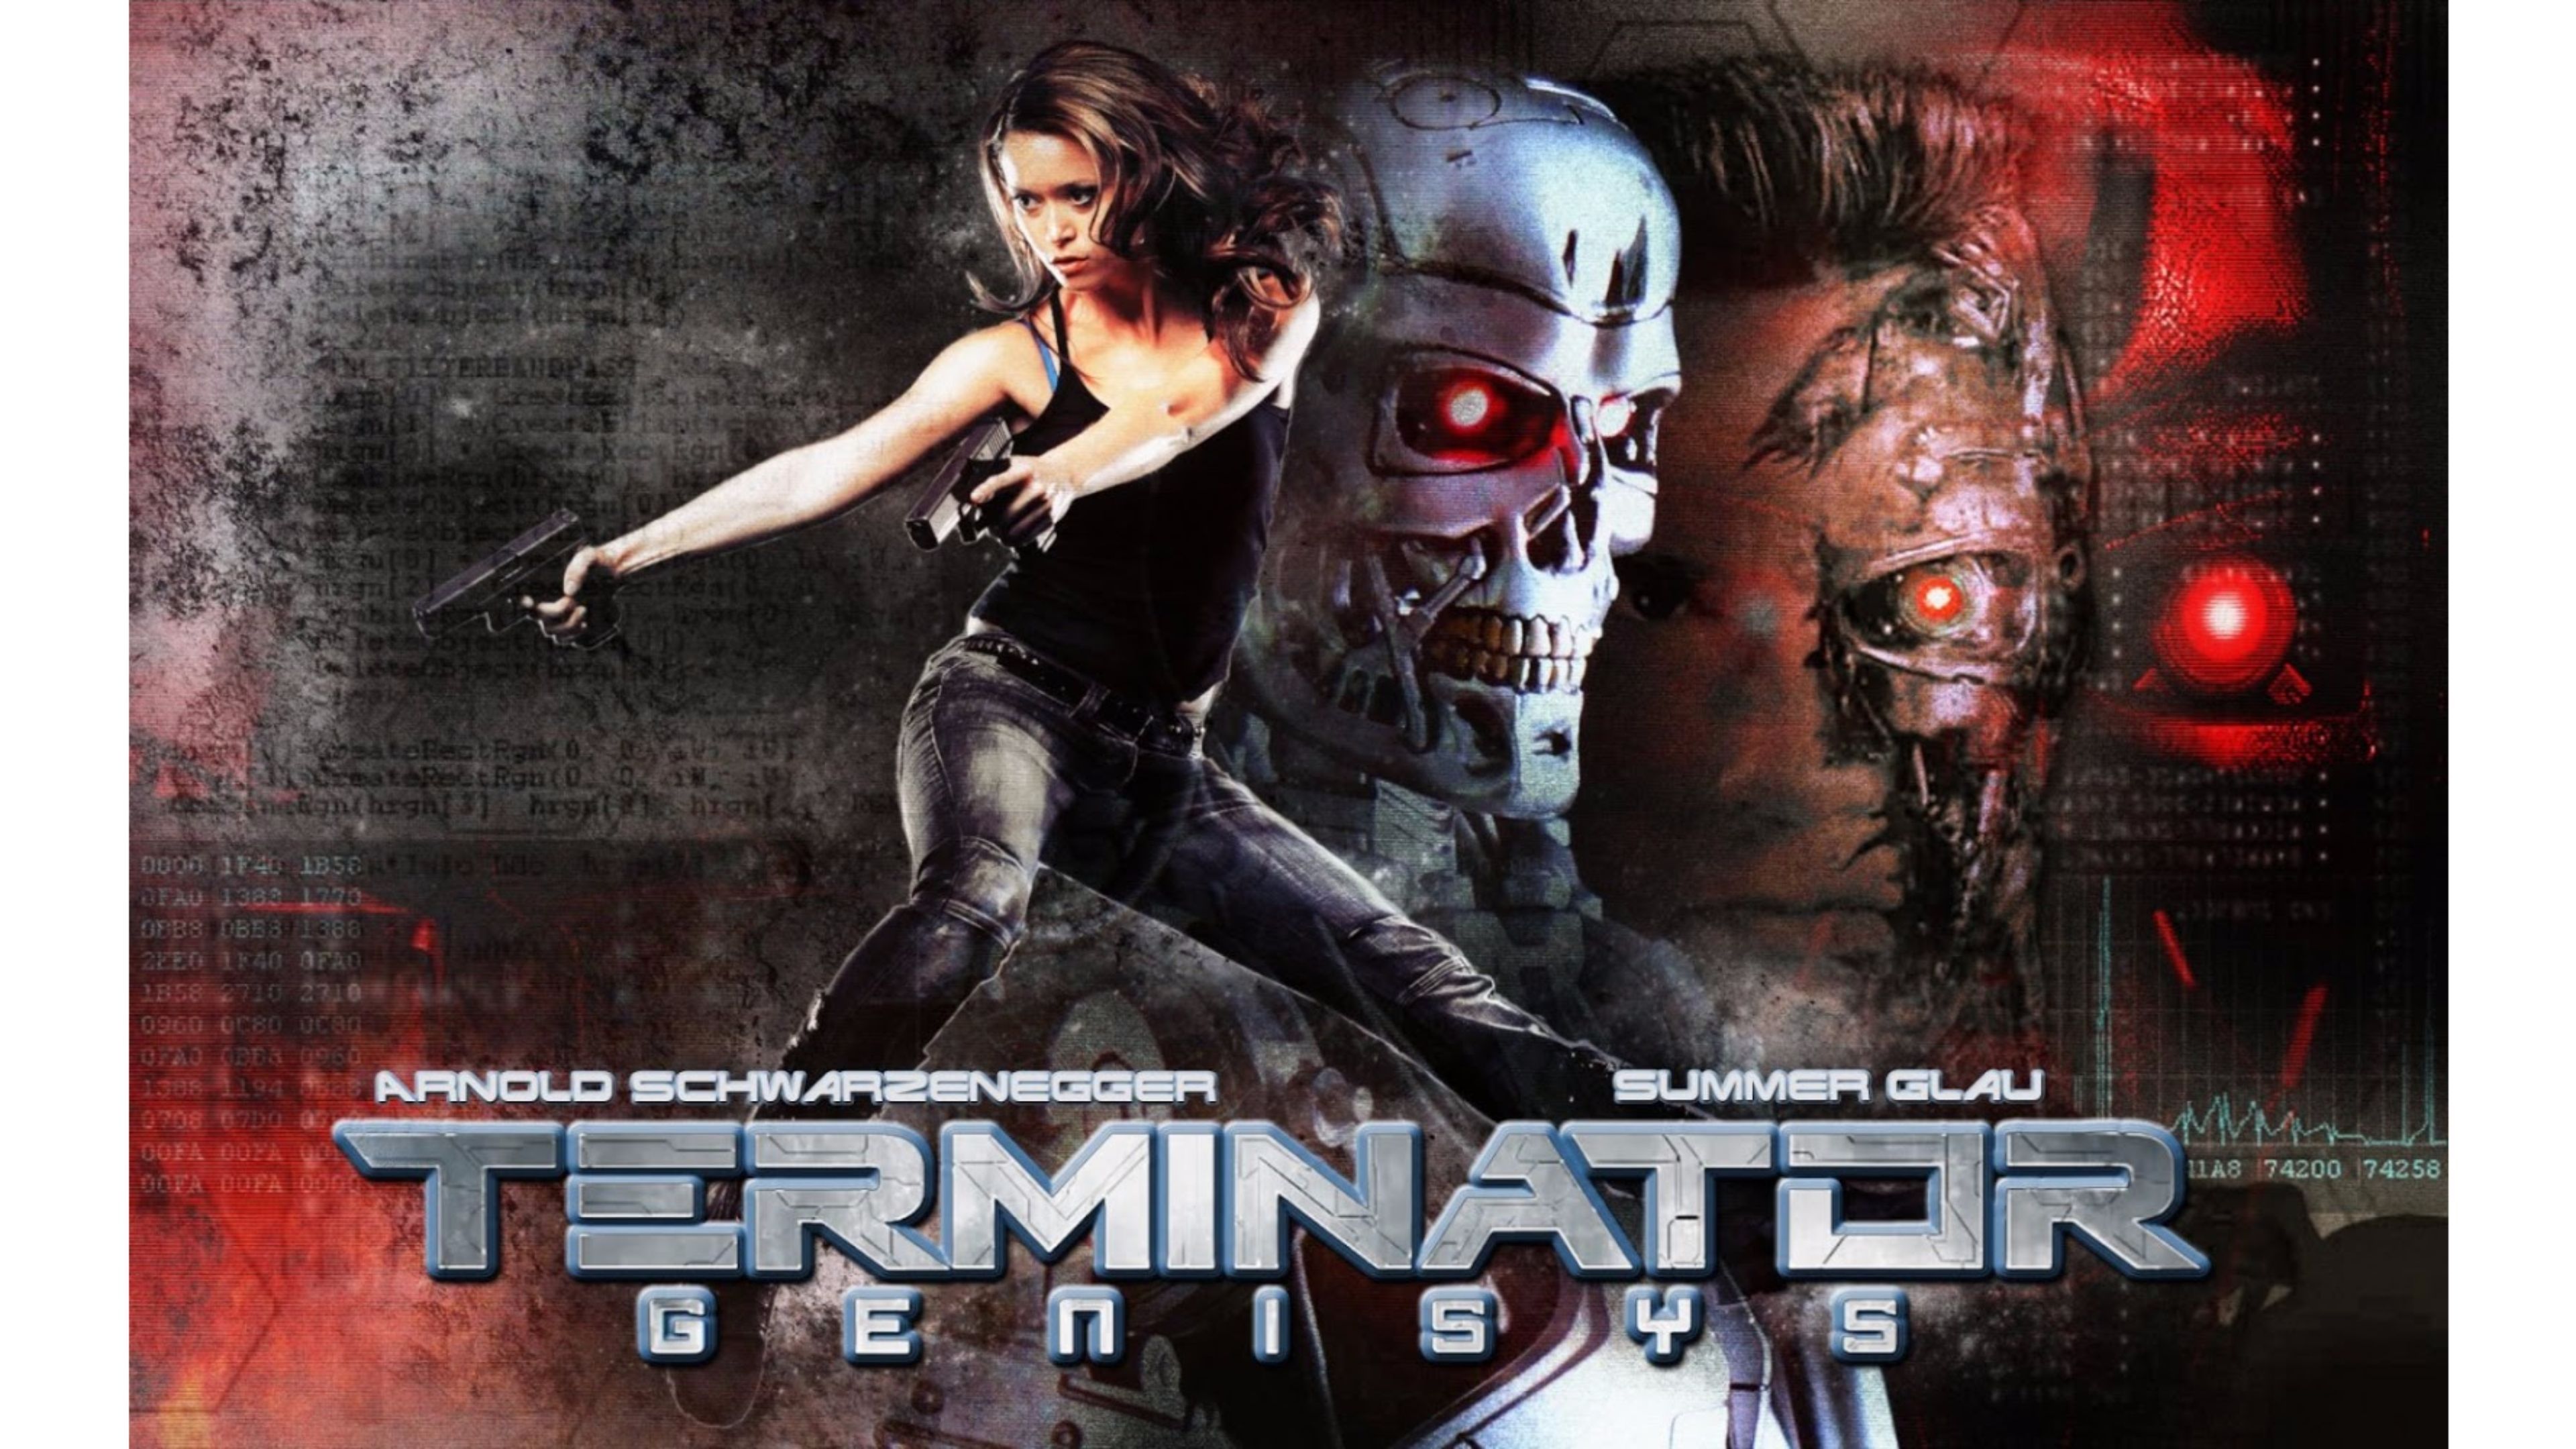 Terminator 4K wallpaper for your desktop or mobile screen free and easy to download